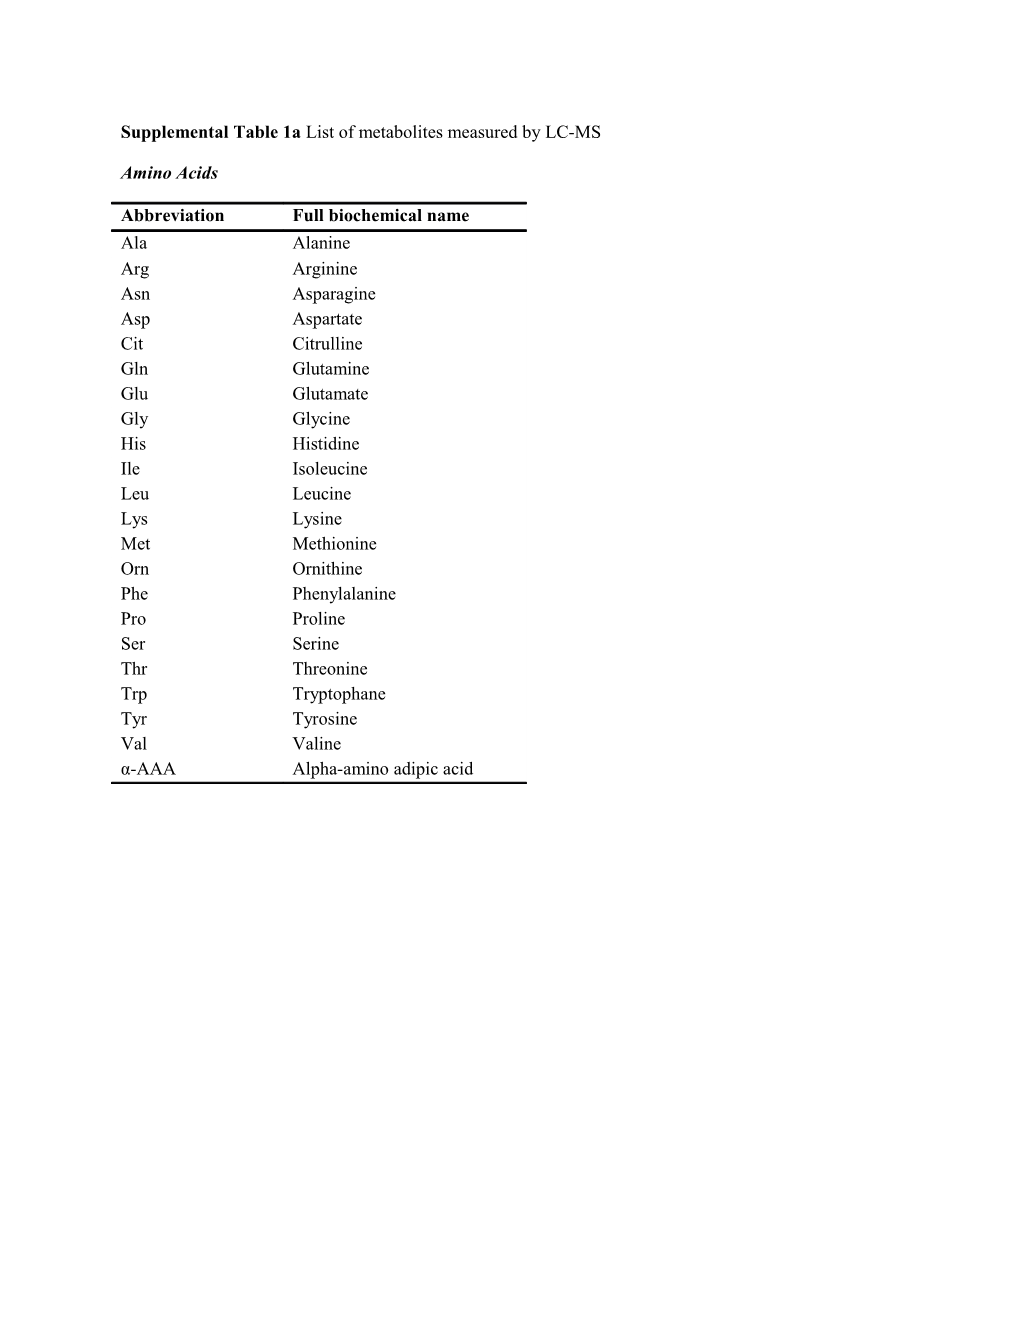 Supplemental Table 1A List of Metabolites Measured by LC-MS